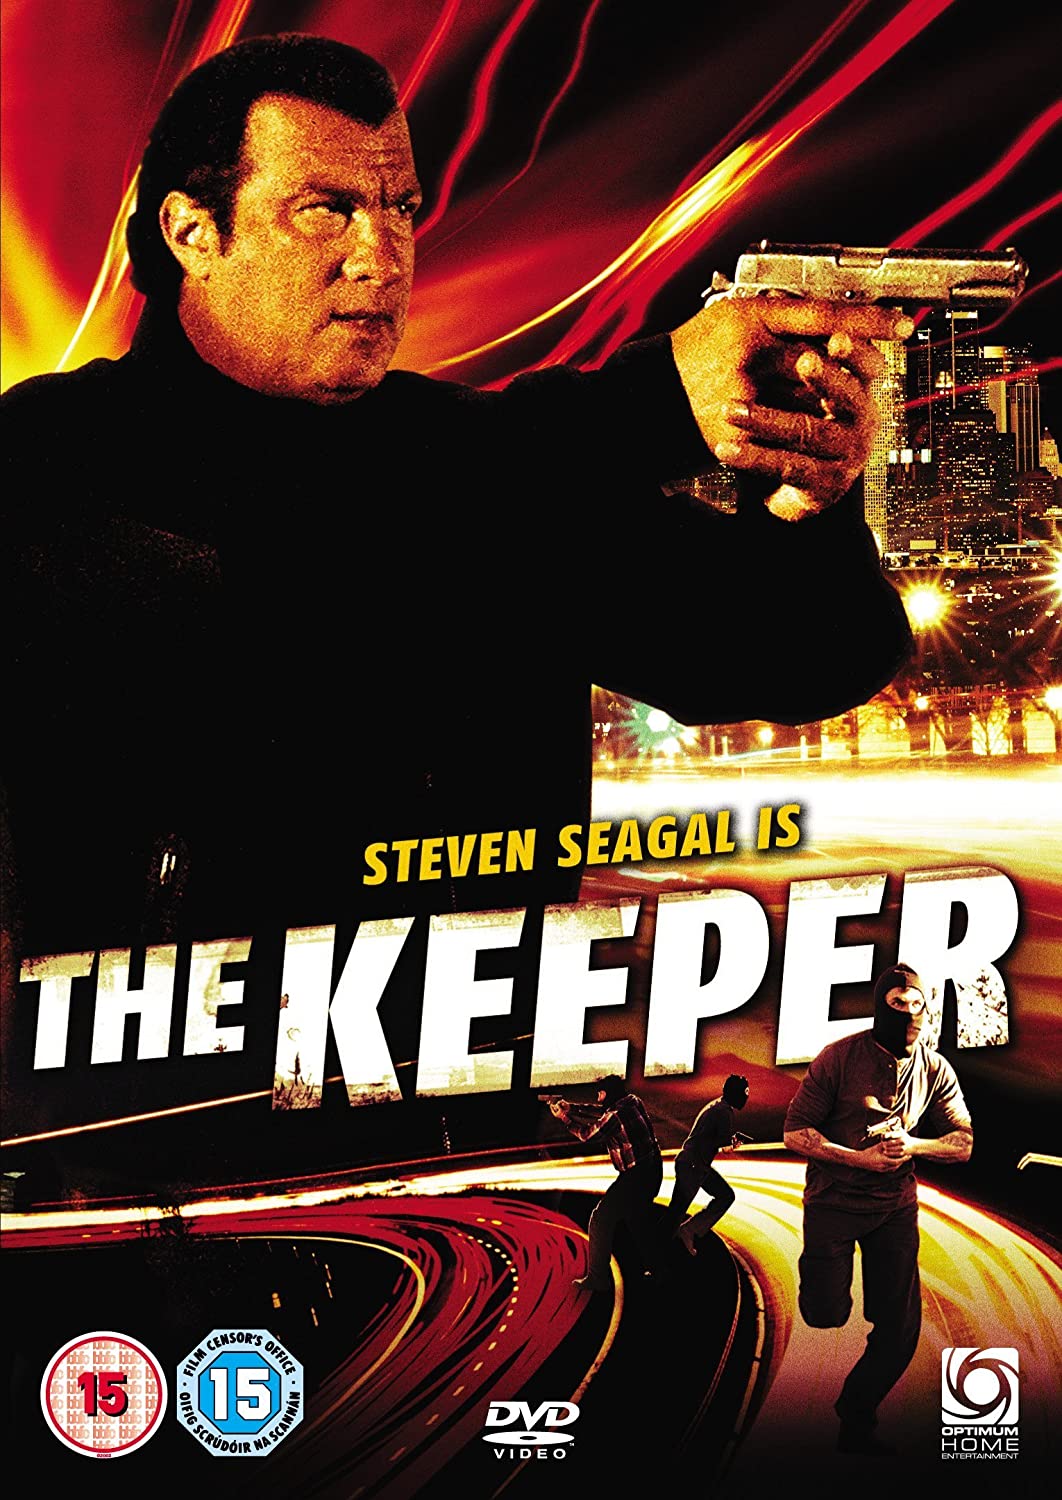 The Keeper [2017] - Action [DVD]